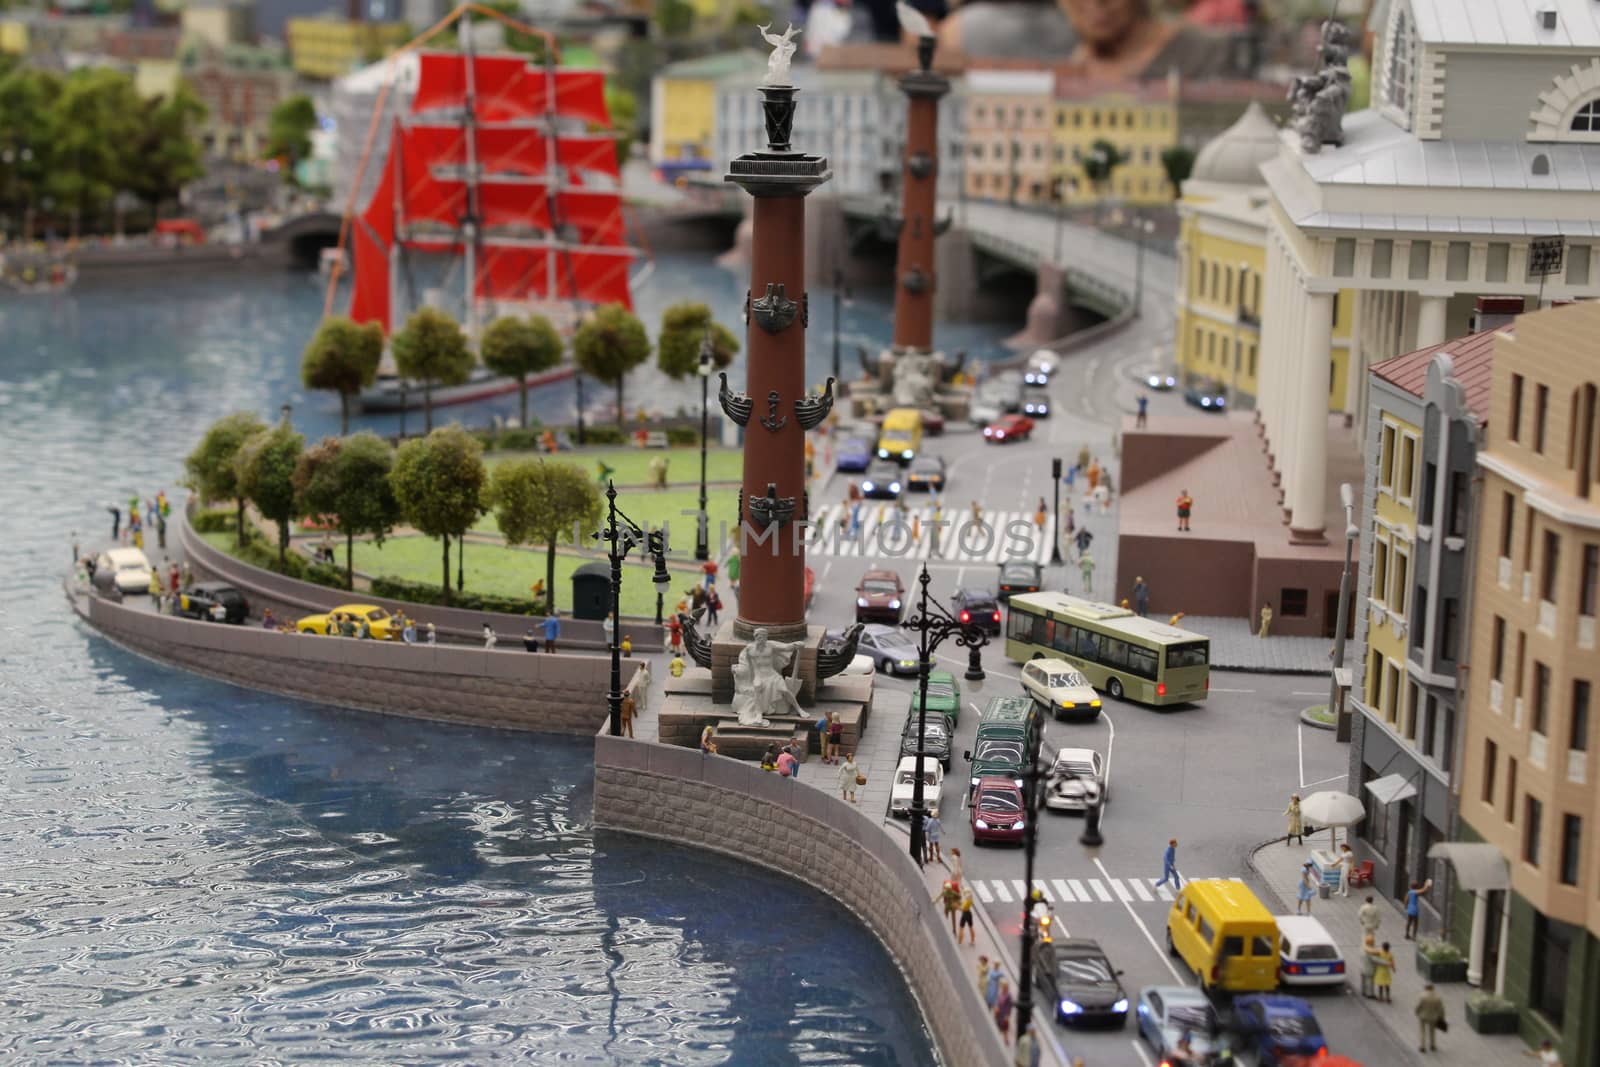 Toy city in a small size, very beautiful and realistic